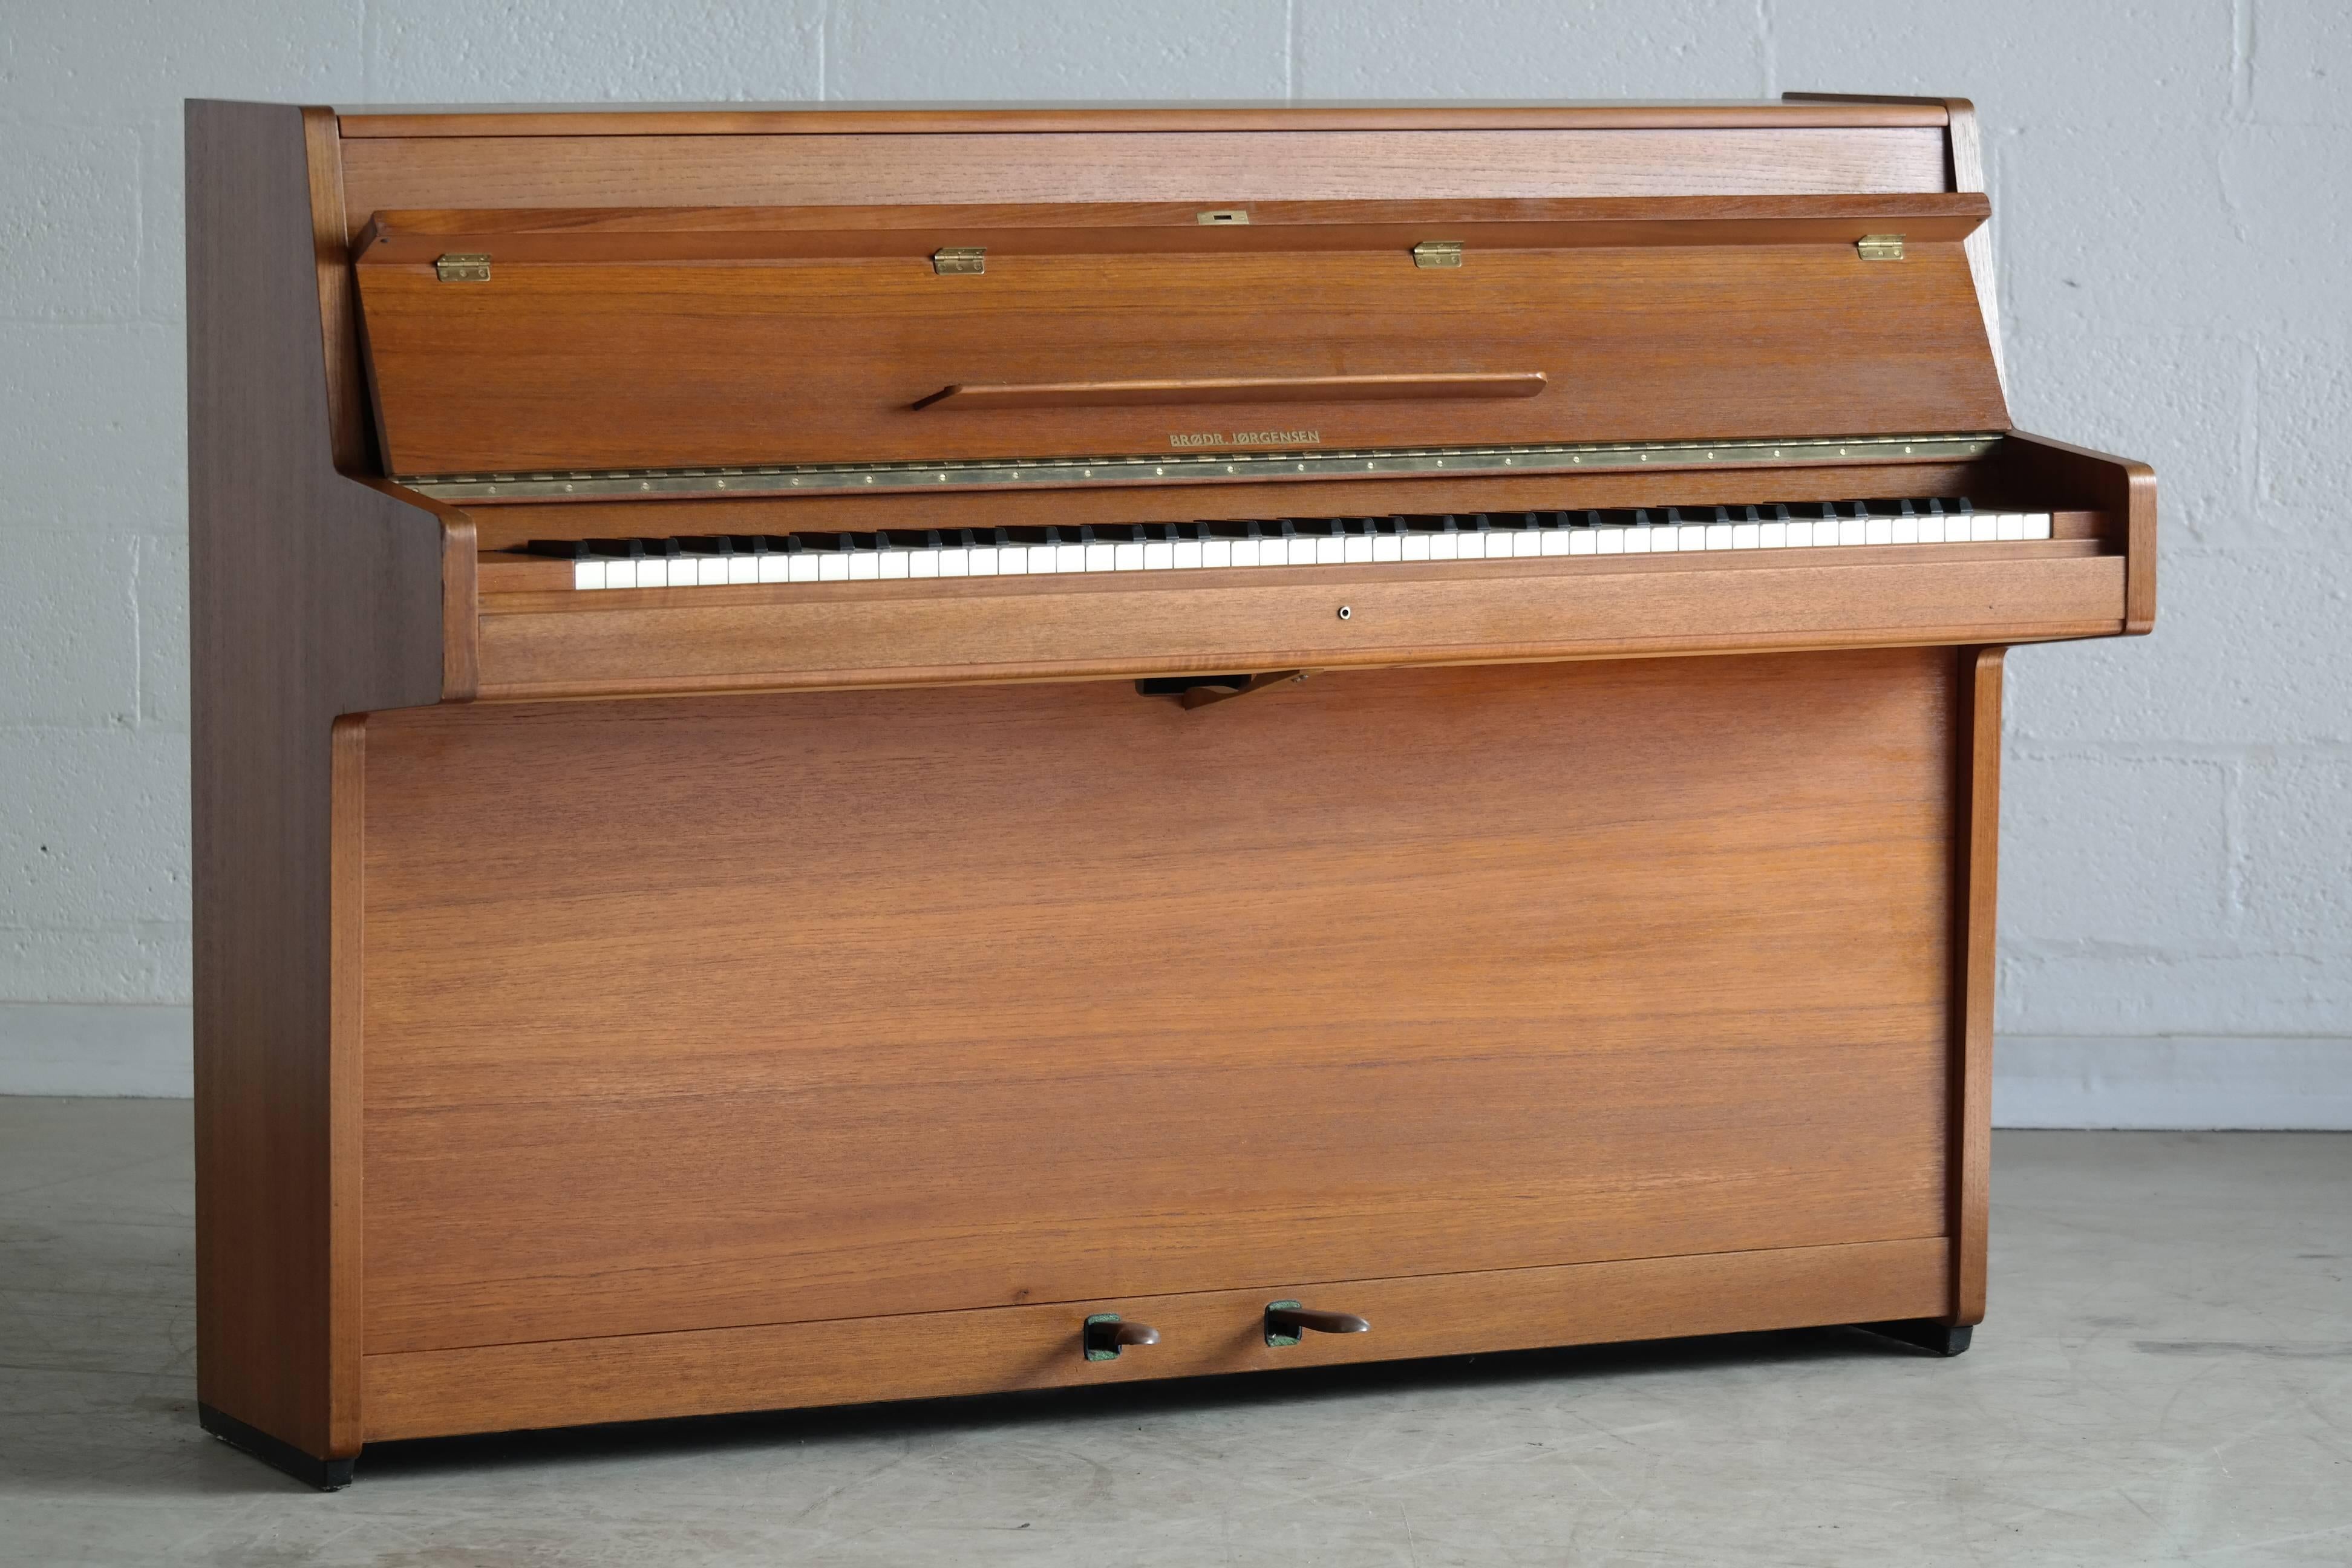 Great and well sounding Mid-Century piano in teak by Brødr. Jørgensen (Jorgensen Bros). Brødr. Jørgensen was a Danish piano manufacturer founded in 1913 closing its doors in 1978. Their pianos remain sought after based on their sound and high build